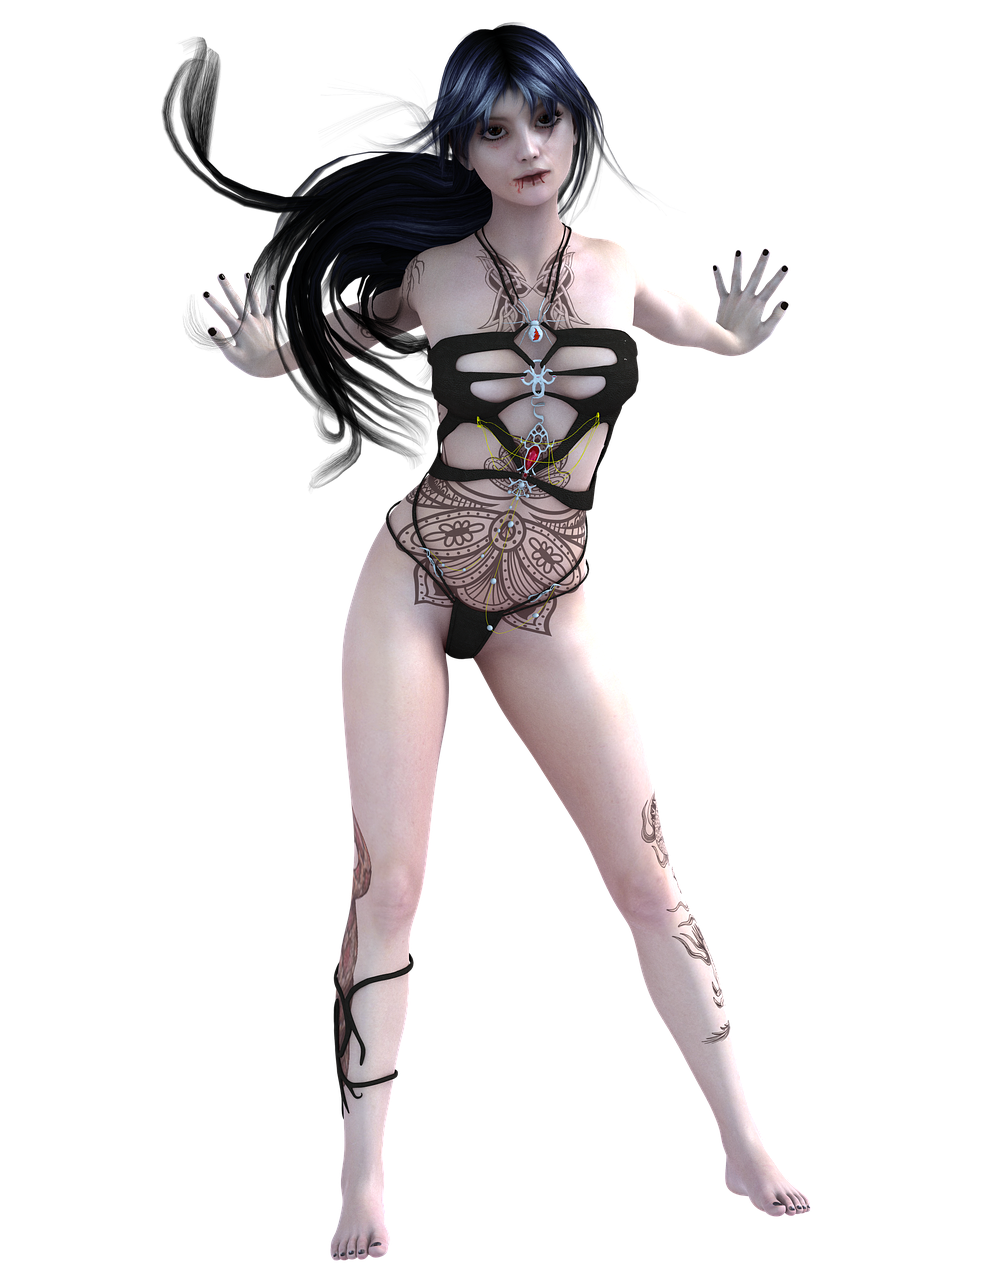 an image of a woman with tattoos on her body, a 3D render, inspired by Brom, gothic art, dark sorceress fullbody pose, pretty face with arms and legs, wearing gothic accessories, body meshes